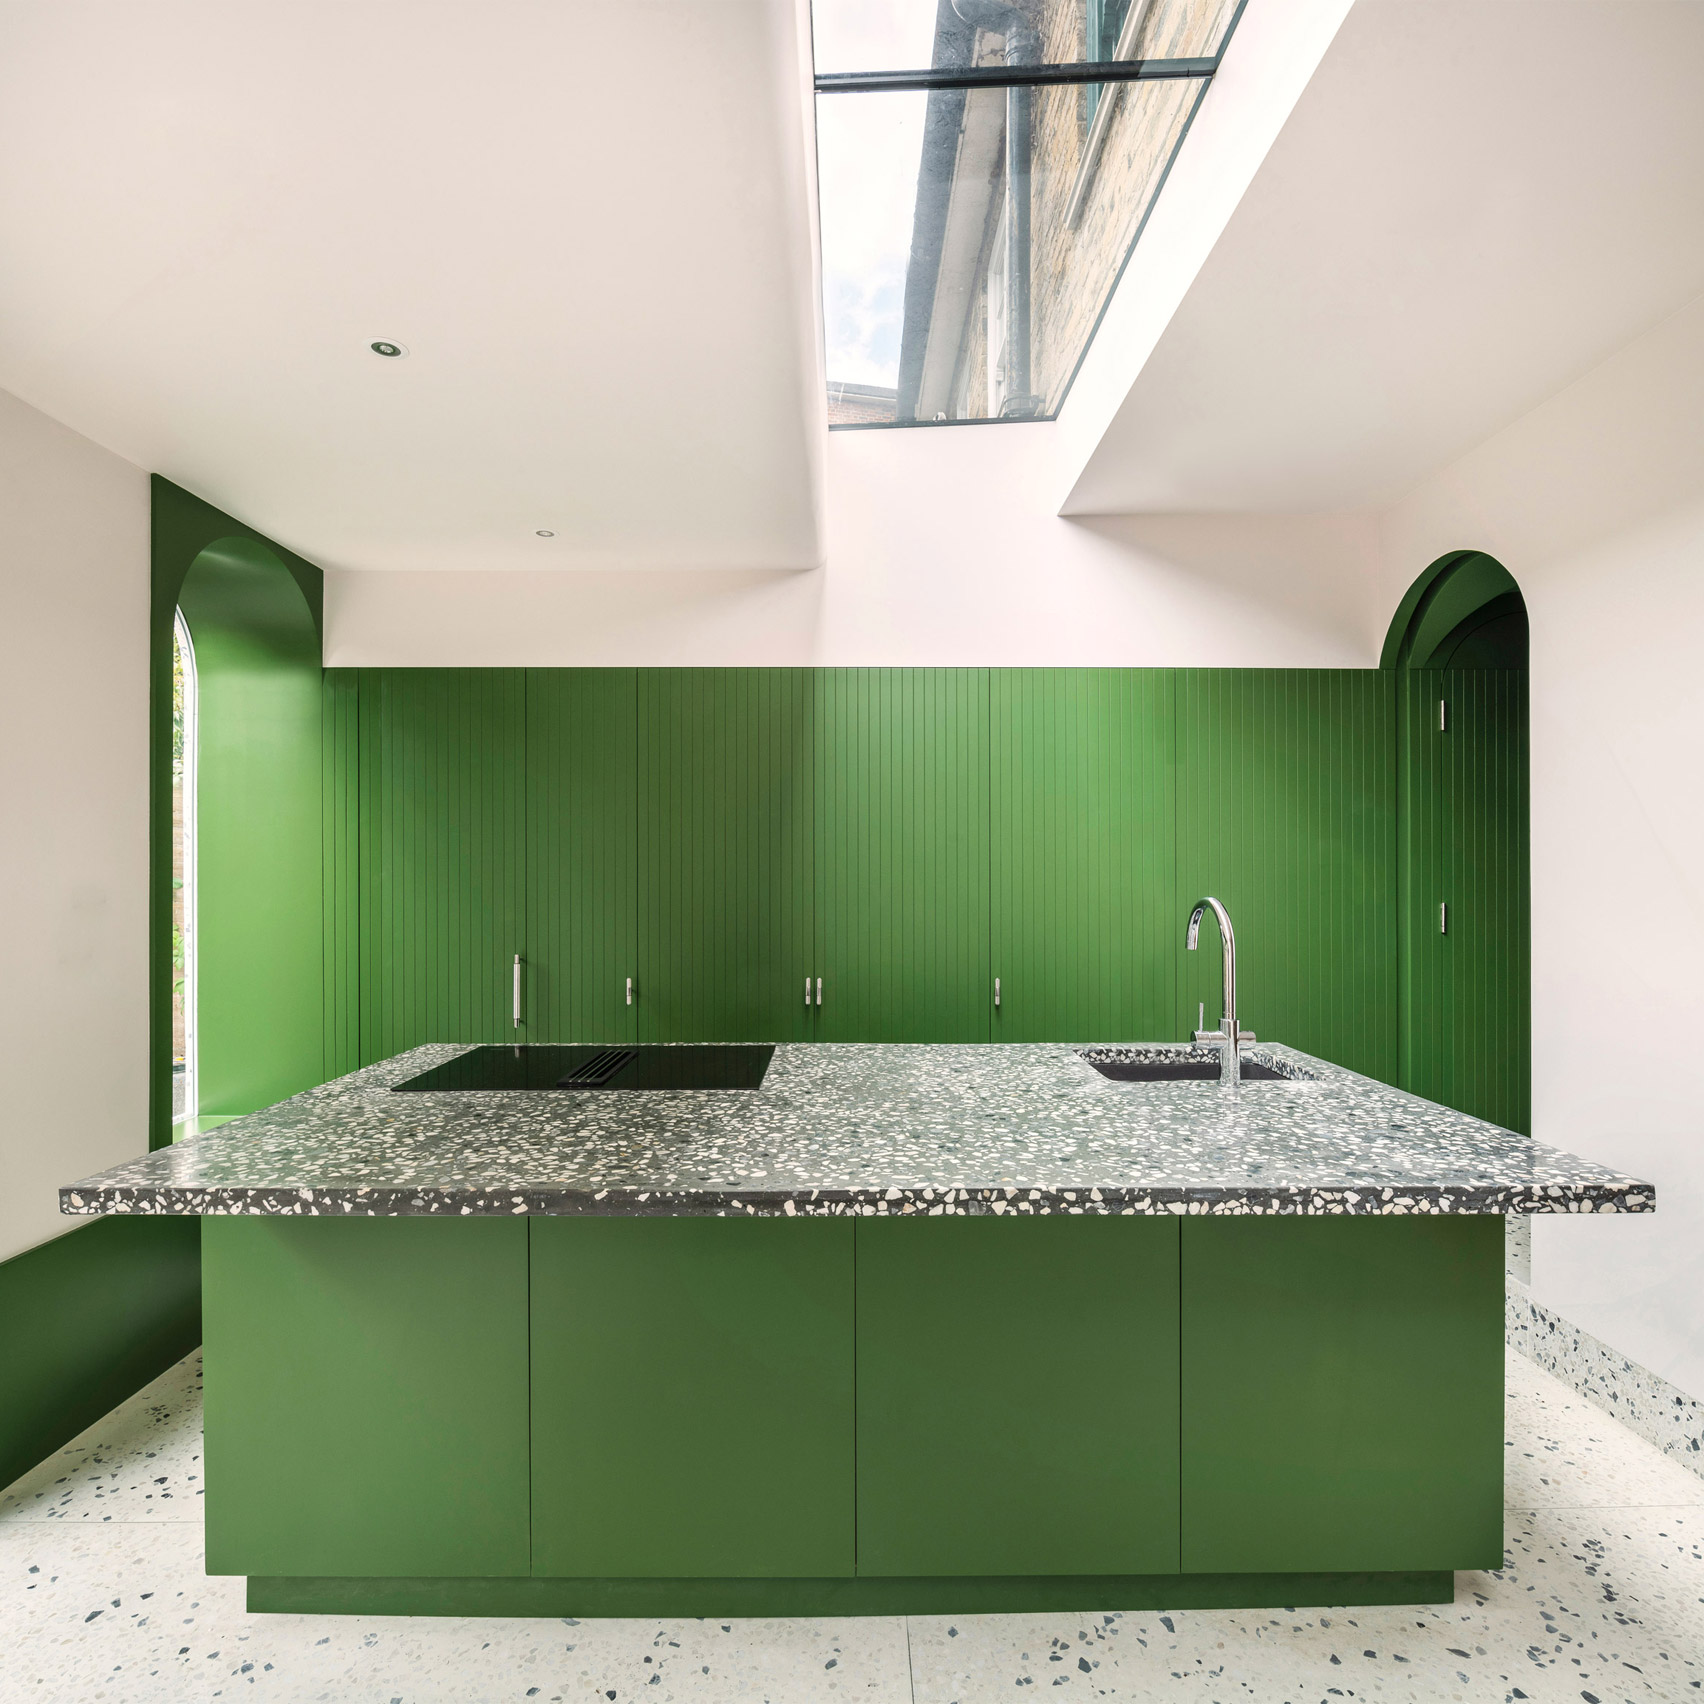 Bright green kitchen with terrazzo detailing